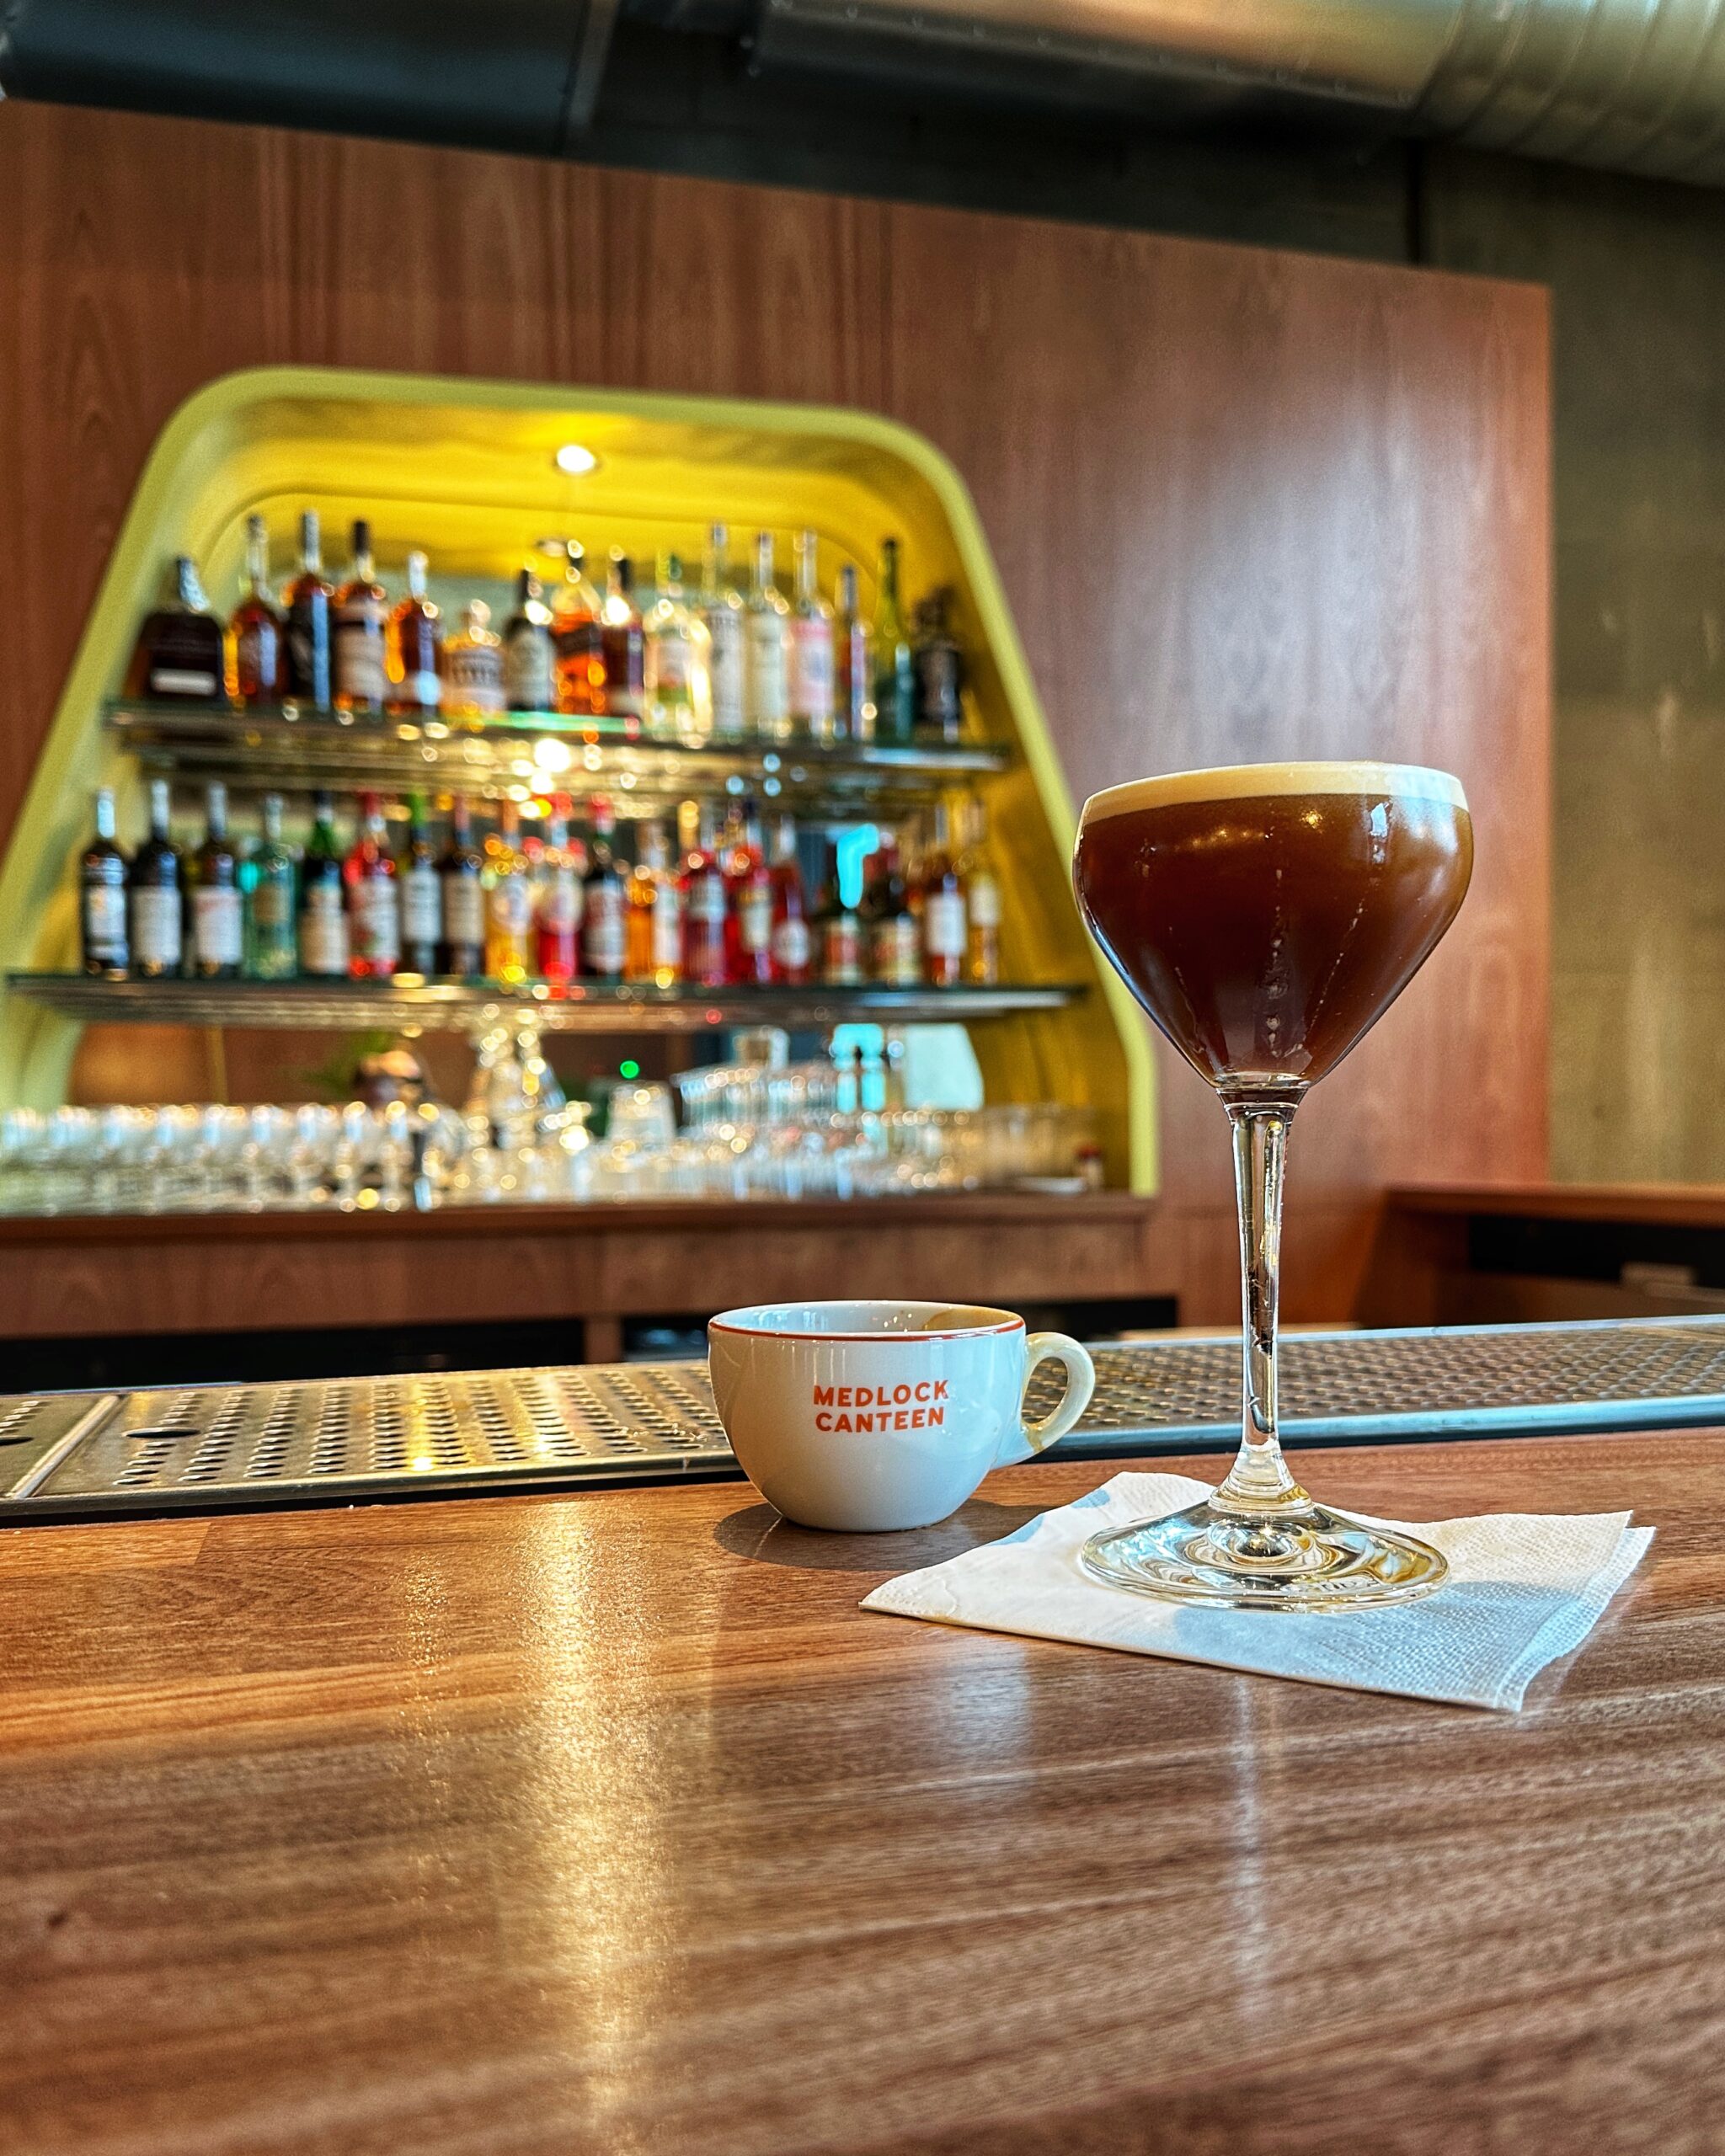 Medlock Canteen will have bottomless coffee - and excellent espresso martinis